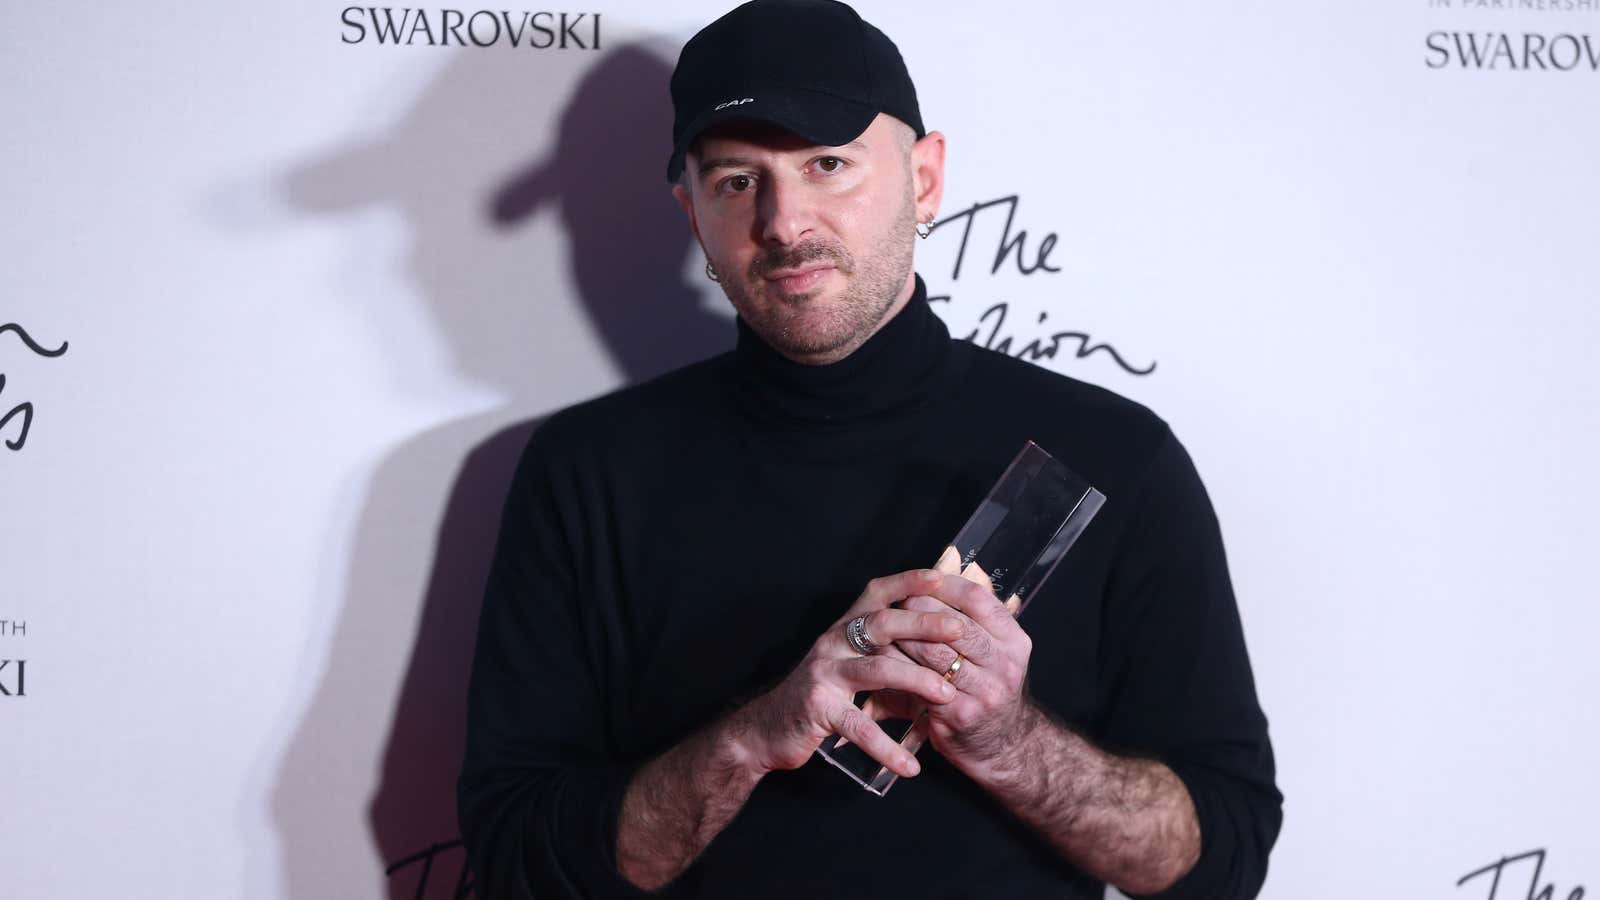 Demna Gvasalia, winner of the International Urban Luxury Brand award poses for photographers at the Fashion Awards 2016 in London, Britain December 5, 2016. REUTERS/Neil Hall – RC14CD40A750